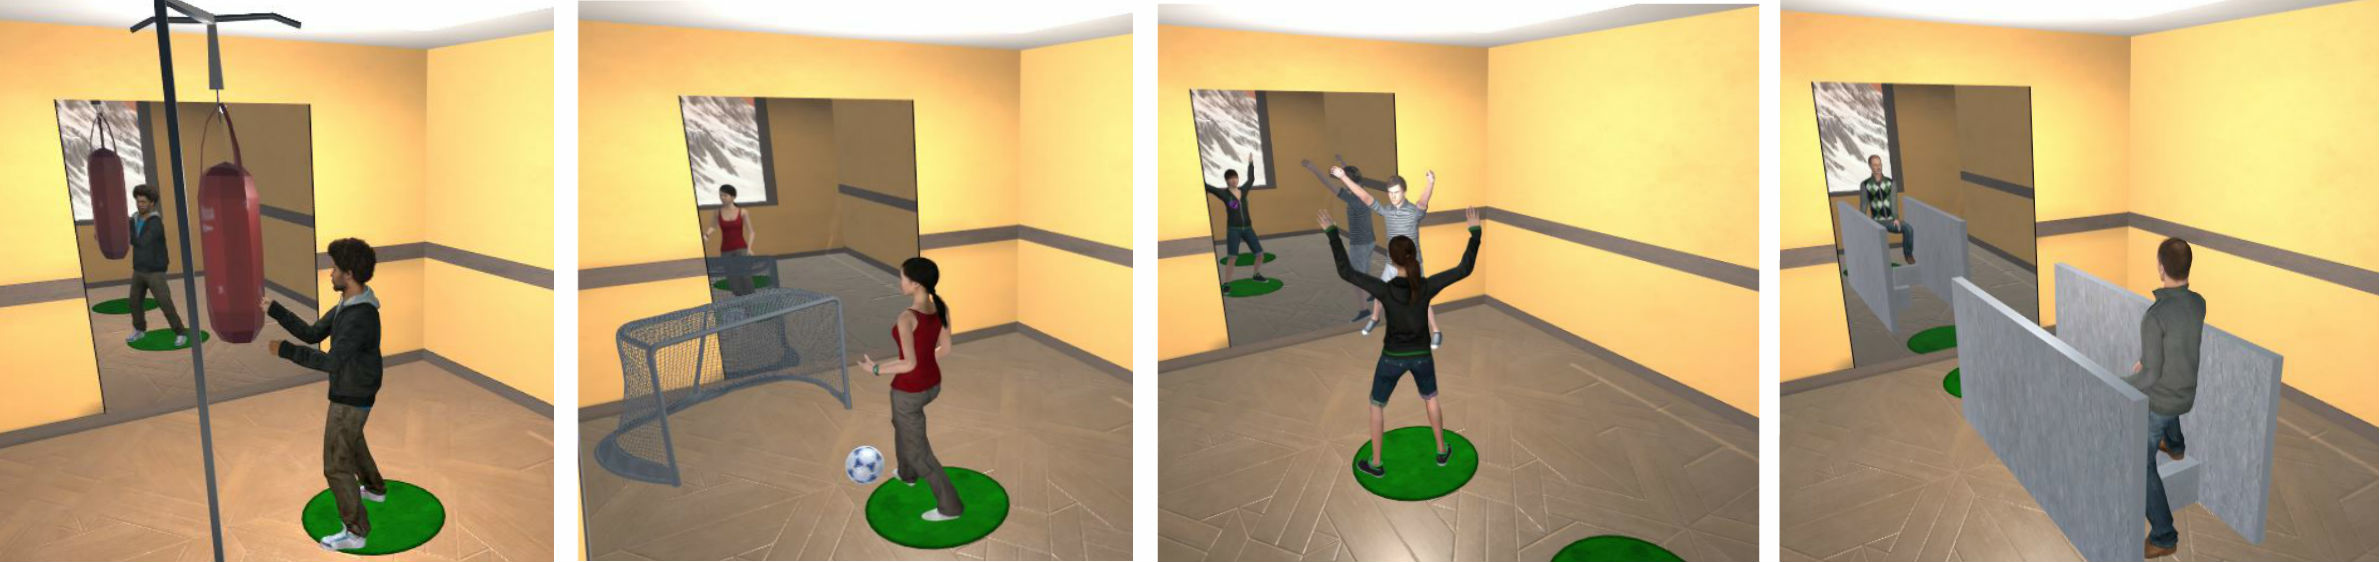 The four tasks implemented in the subjective matching experiment with avatars at the maximum level of appearance. From left
to right: Punching, Soccer, Fitness and Walking.